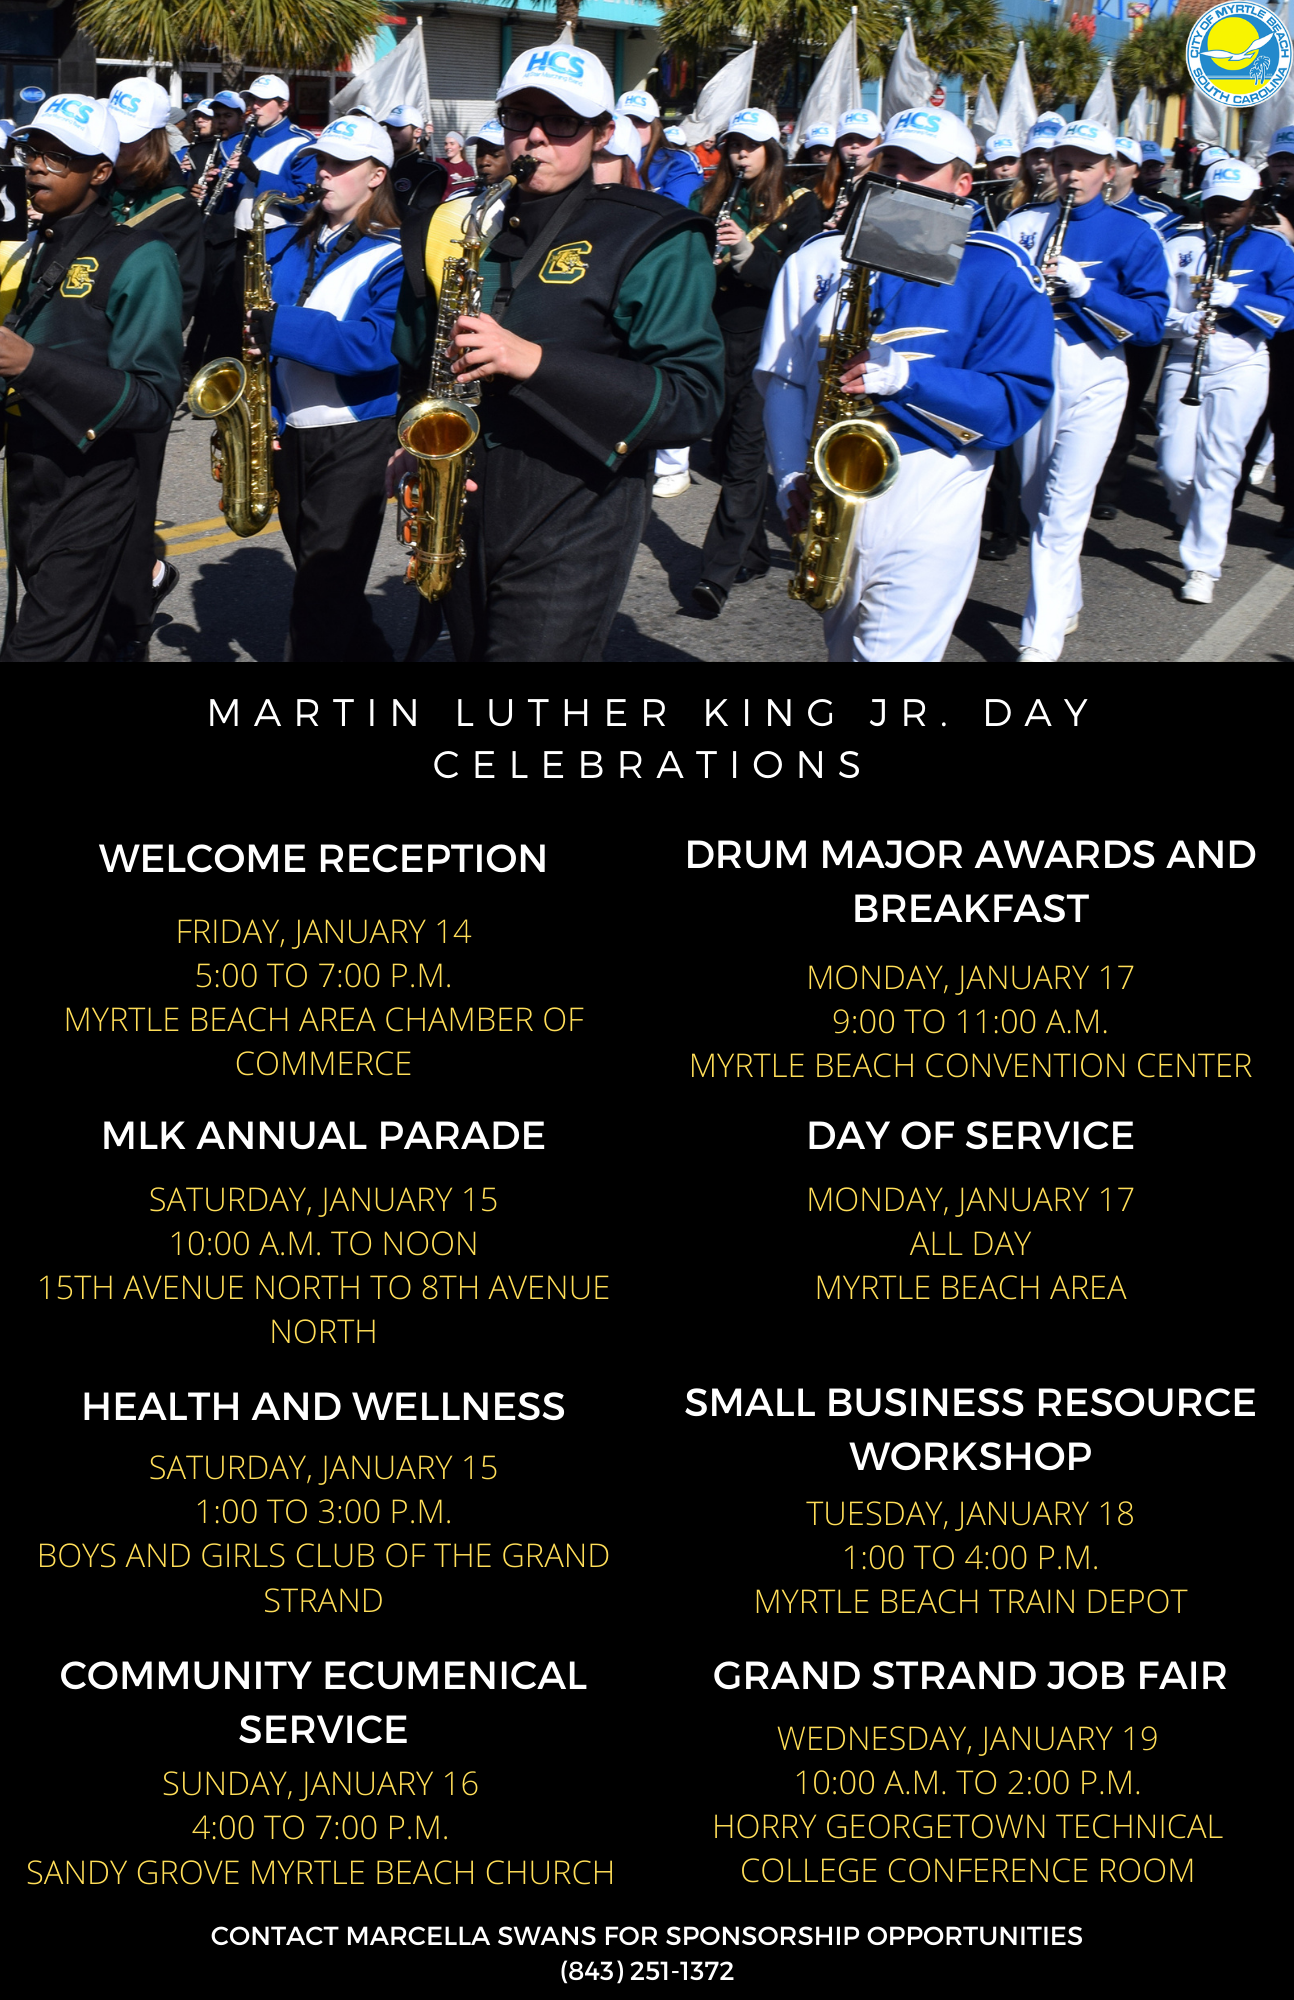 MARTIN LUTHER KING JR. DAY CELEBRATIONS (1)